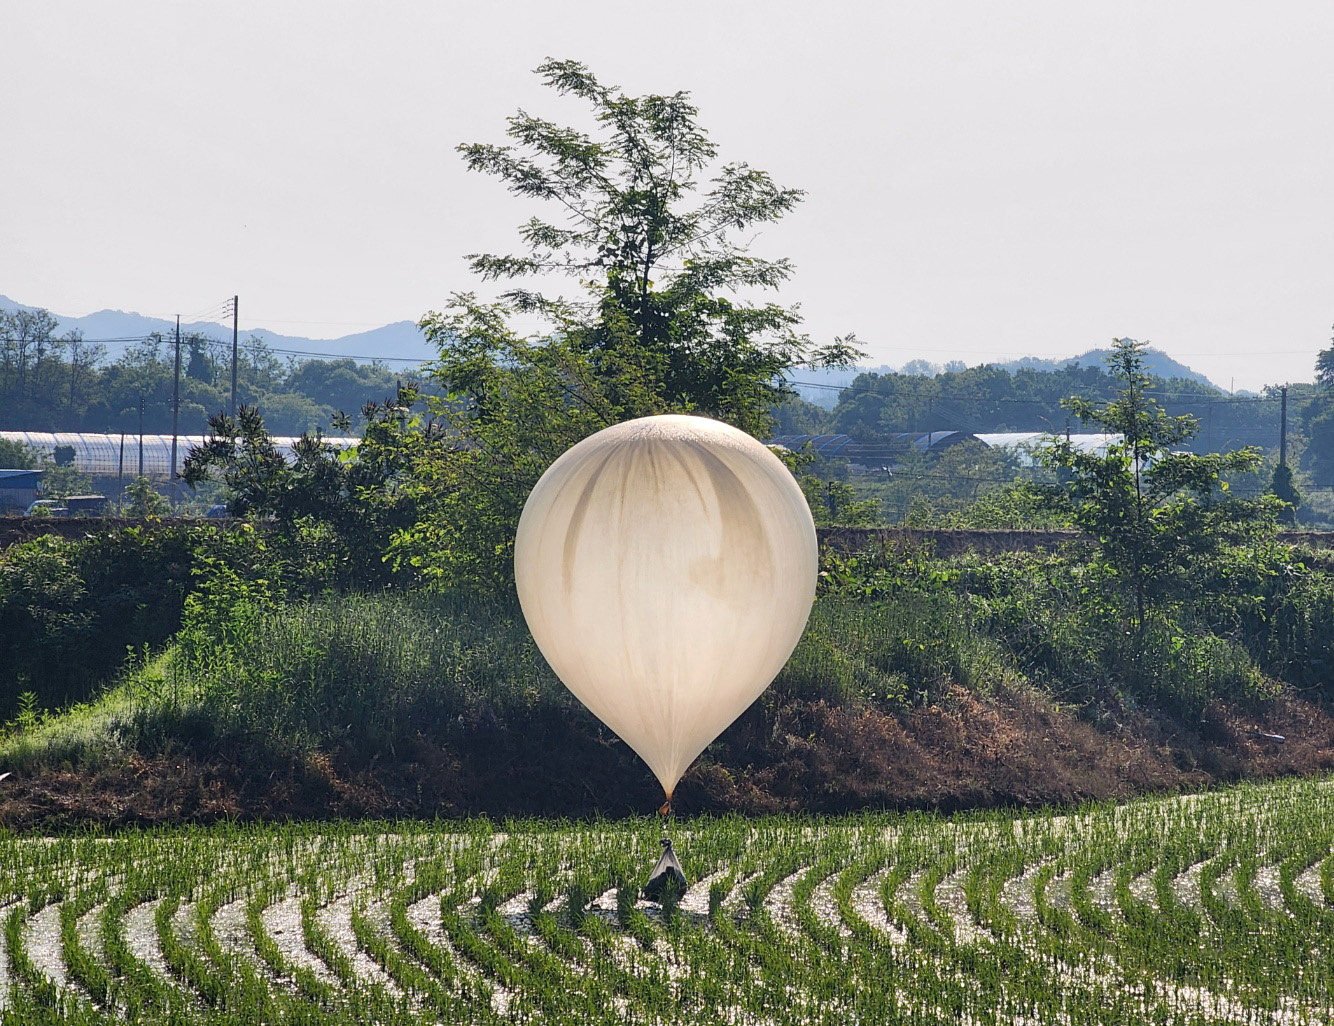 A balloon believed to have been sent by North Korea, carrying objects including what appeared to be trash and excrement, is seen over a rice field in Cheorwon, South Korea, on Wednesday. Photo: Yonhap via Reuters